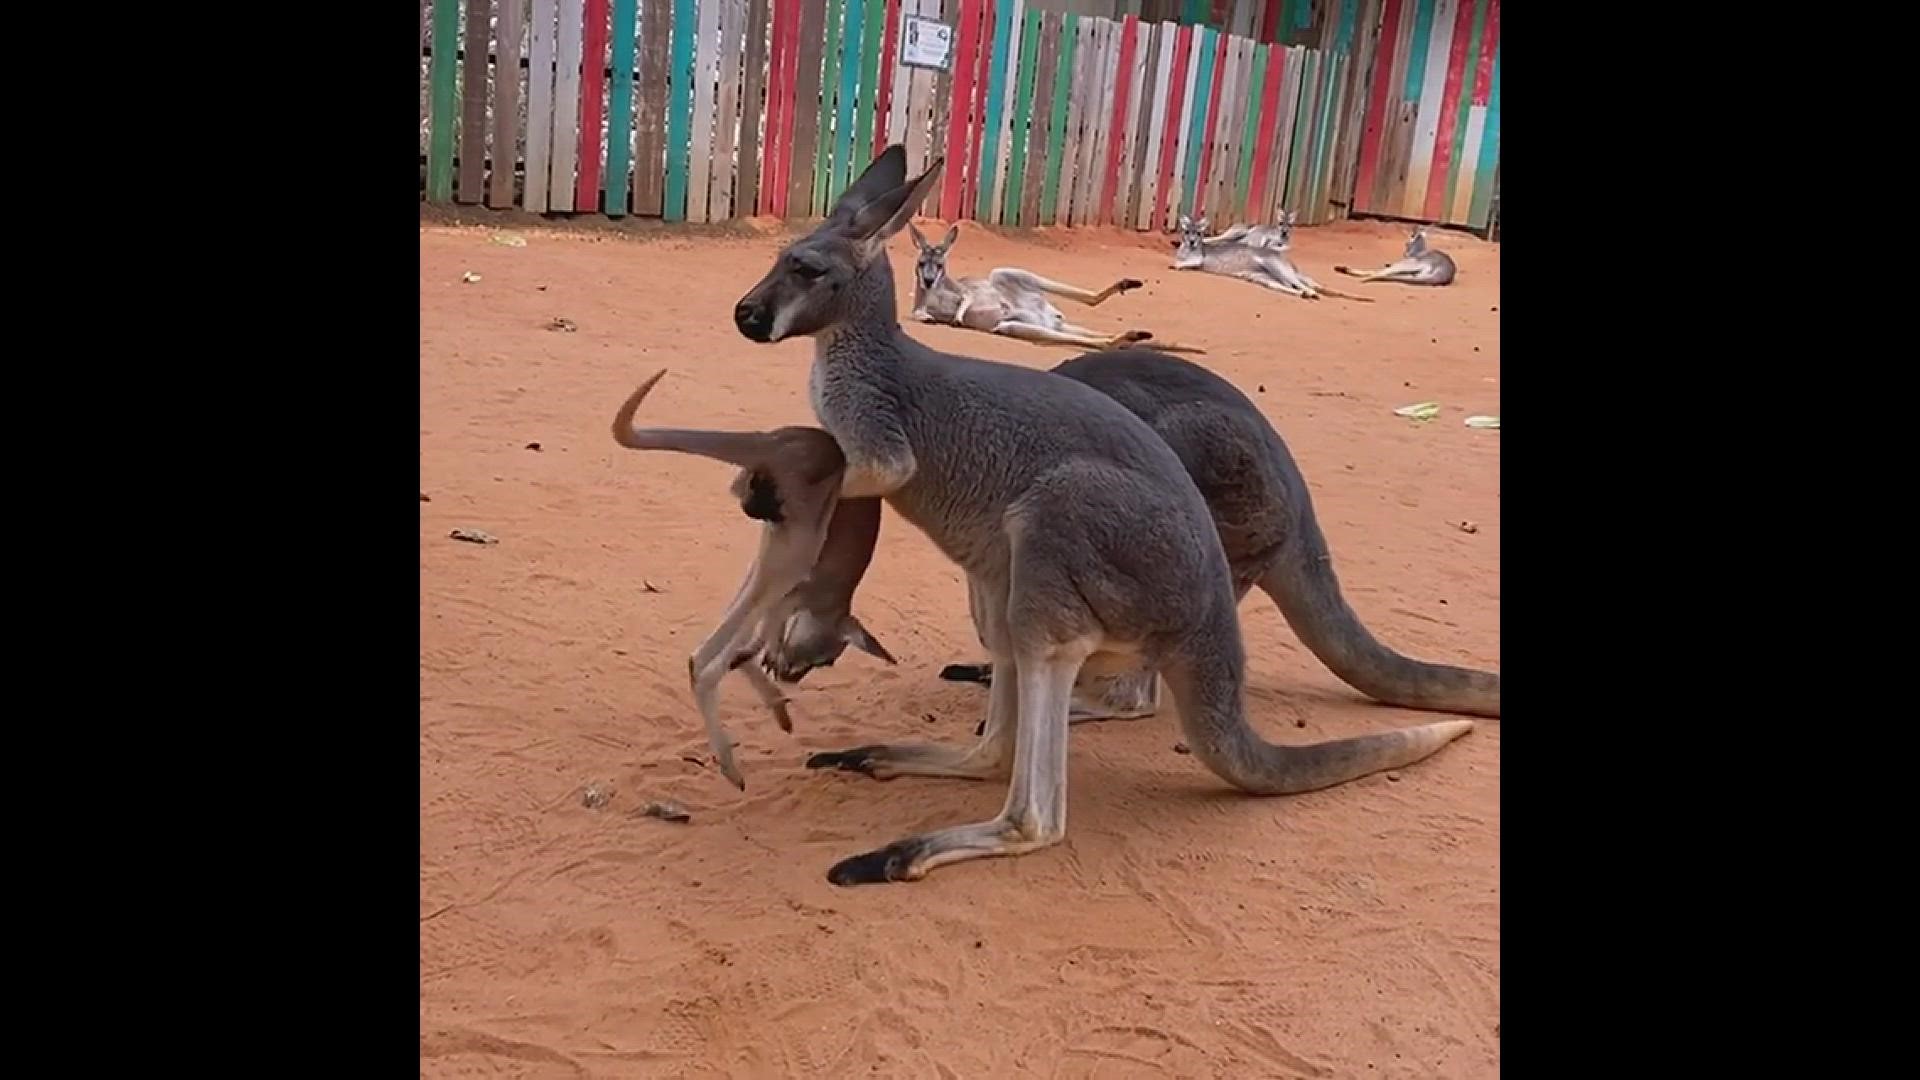 This kangaroo mom is trying to deal with her toddler joey.